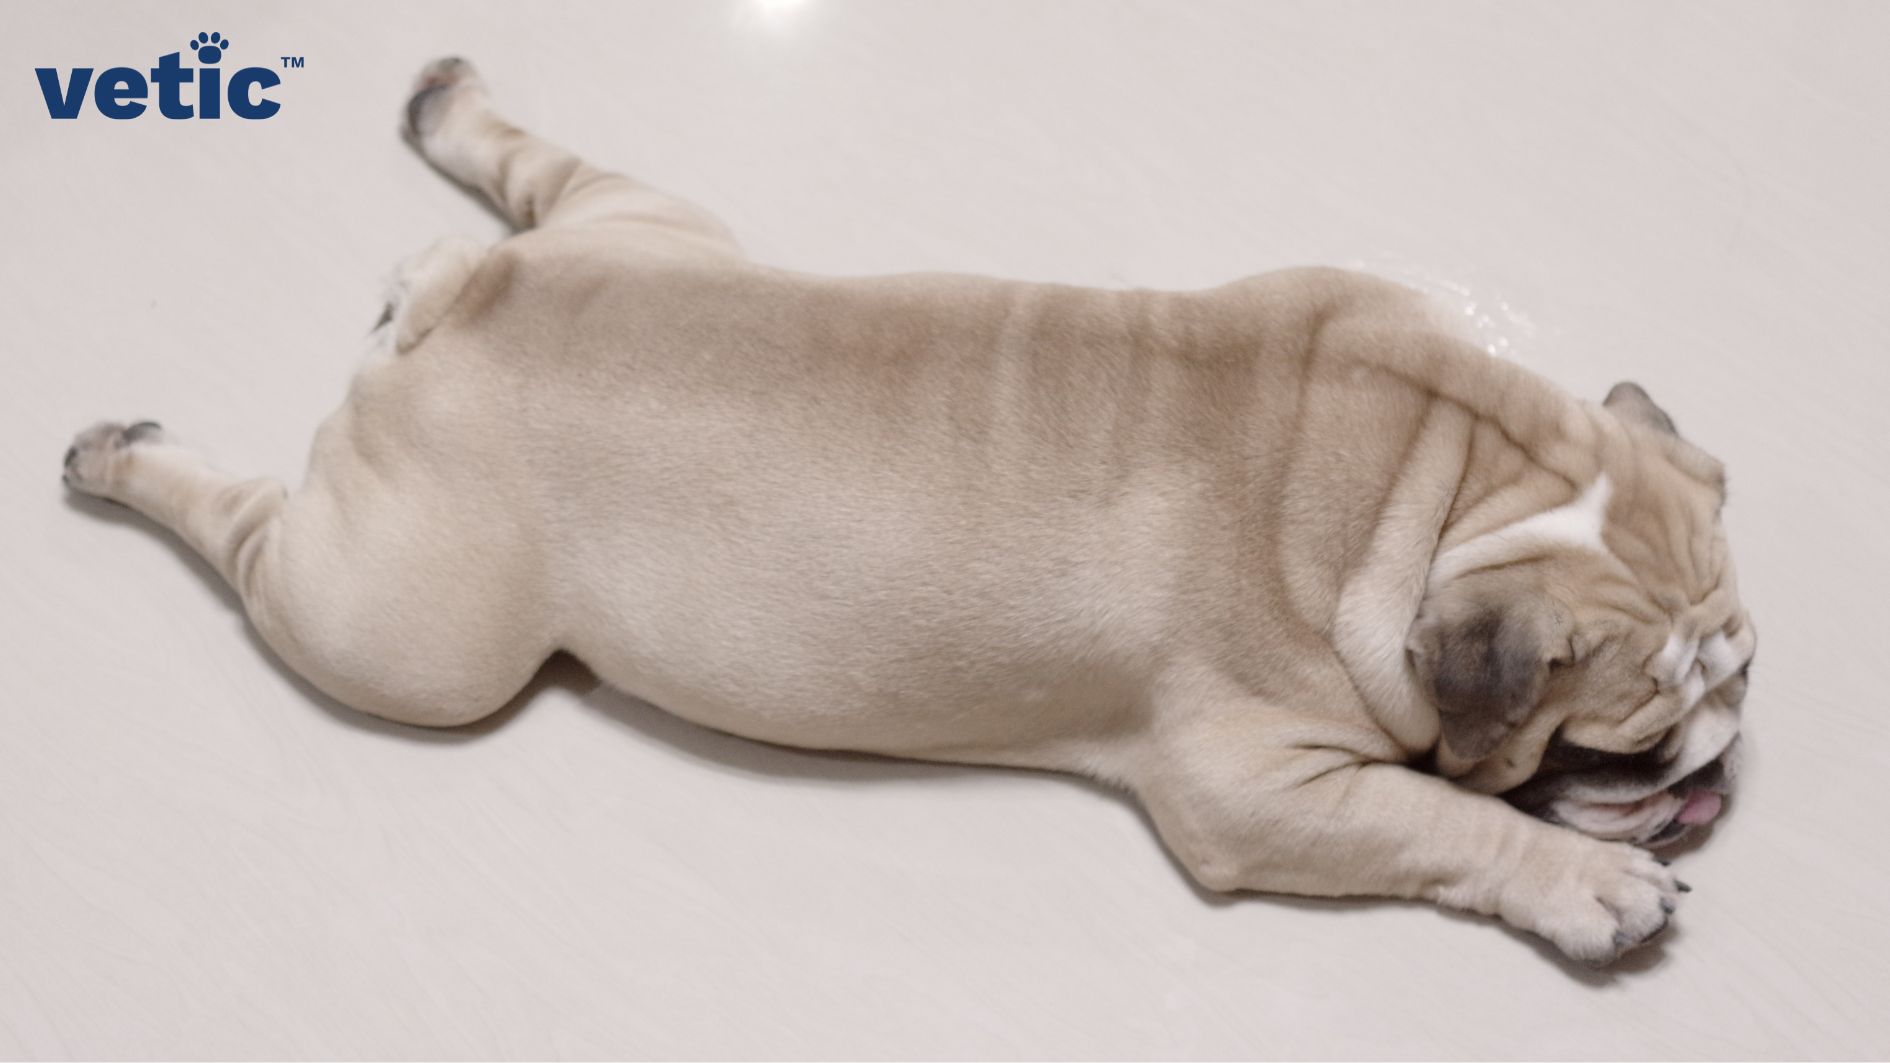 an English Bulldog lying splayed on the floor. The top shot shows the front paws beside his face and the two back legs spread straight behind him. It is a non-recommended posture that increases the risk of arthritis in dogs as they grow older